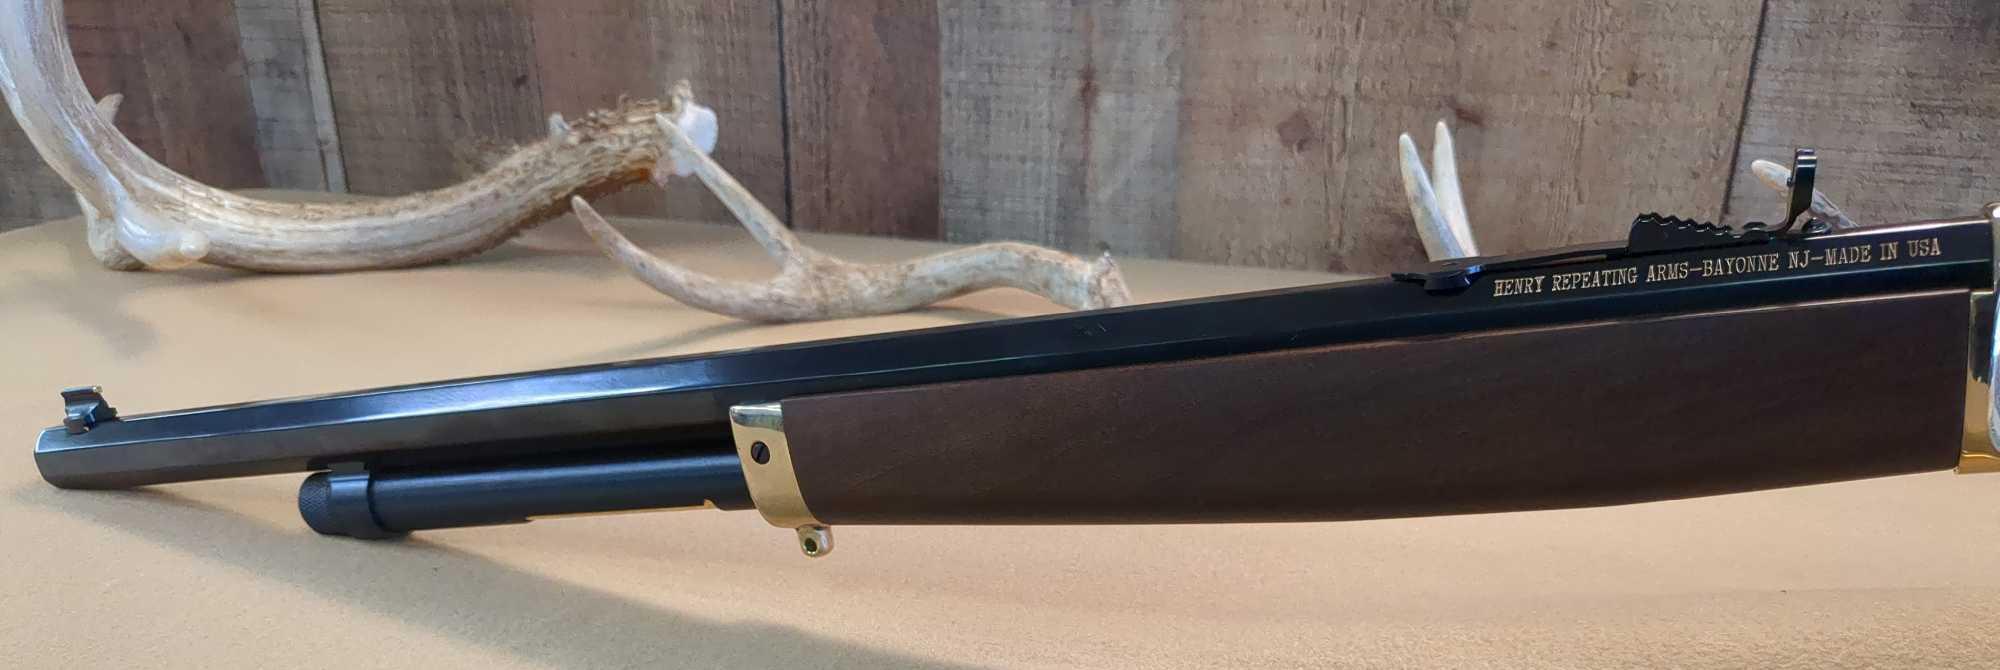 HENRY REPEATING ARMS CO. MODEL H010B .45-70 GOVT LEVER ACTION RIFLE